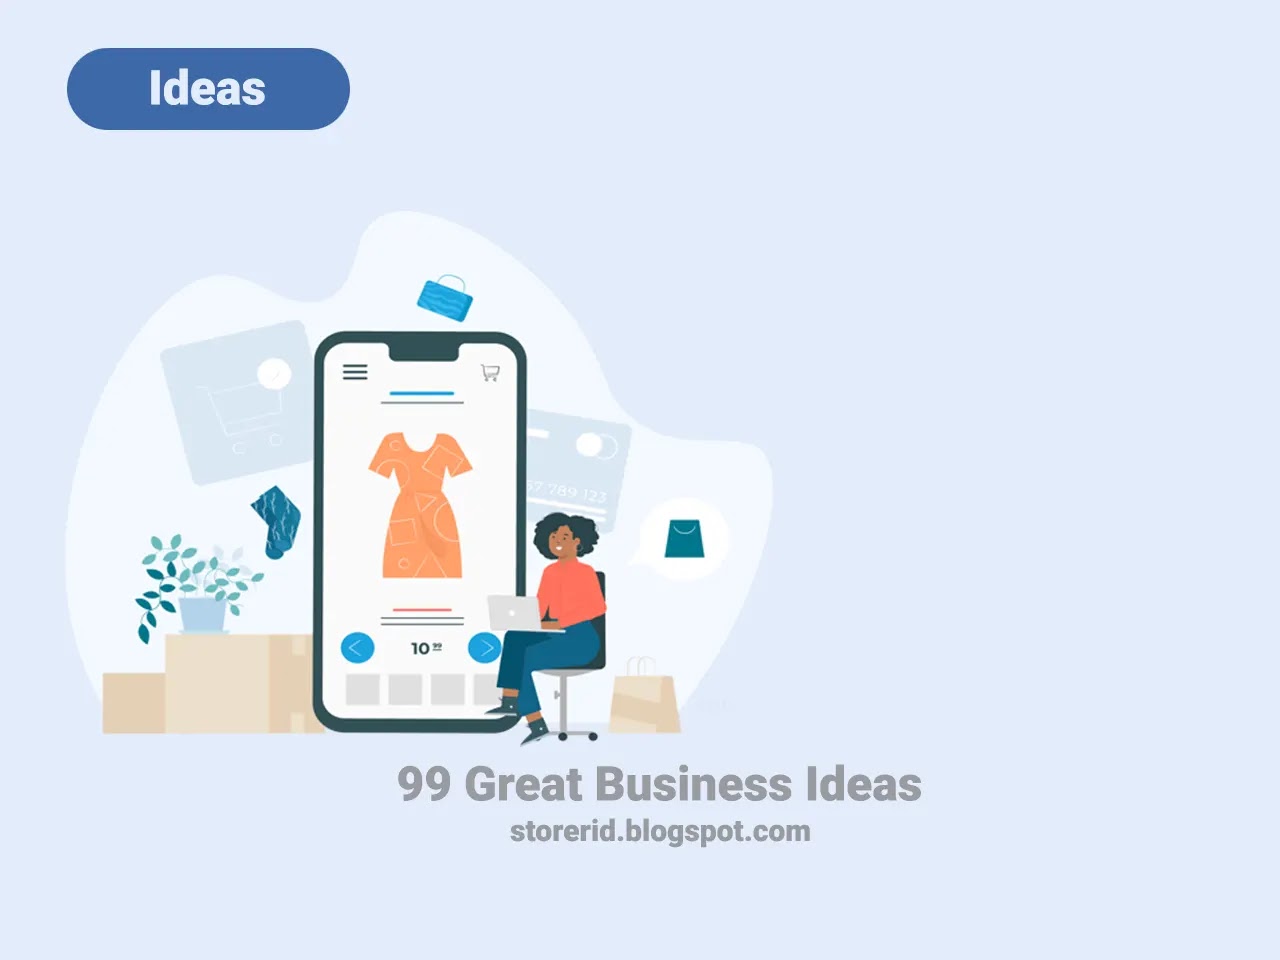 99 Great Business Ideas